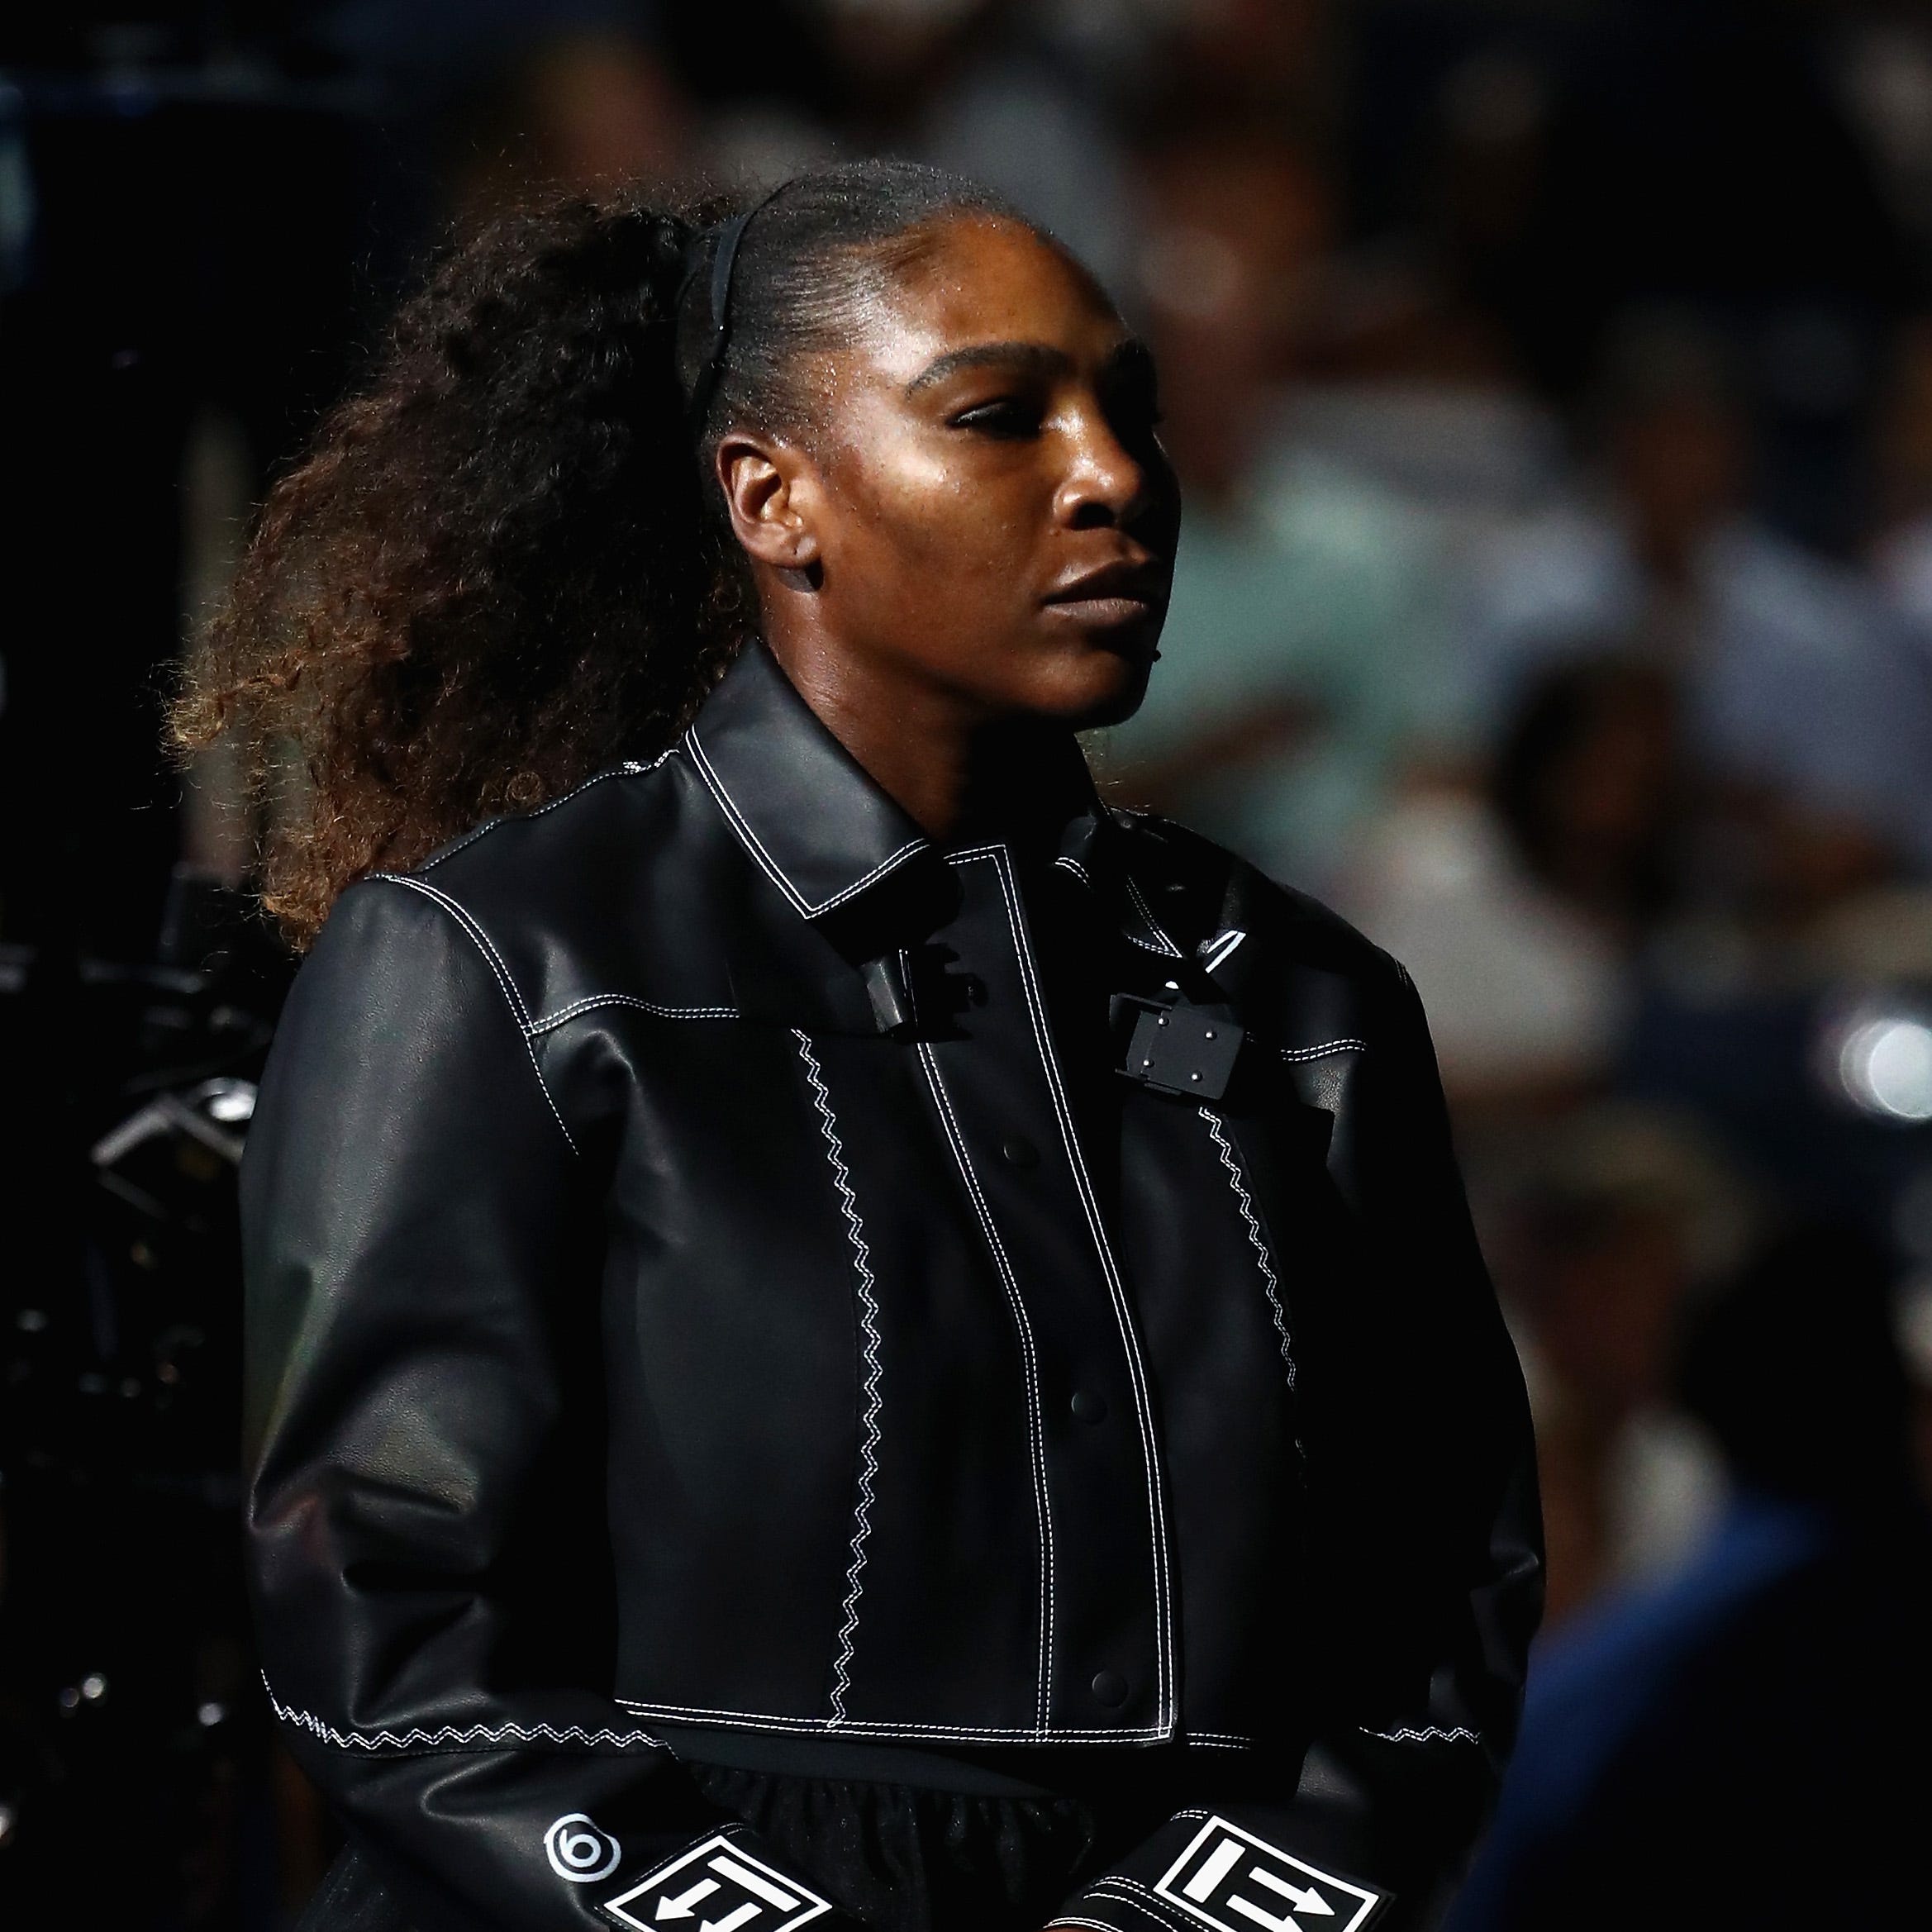 Serena Williams takes the court for her opening match at the US Open.